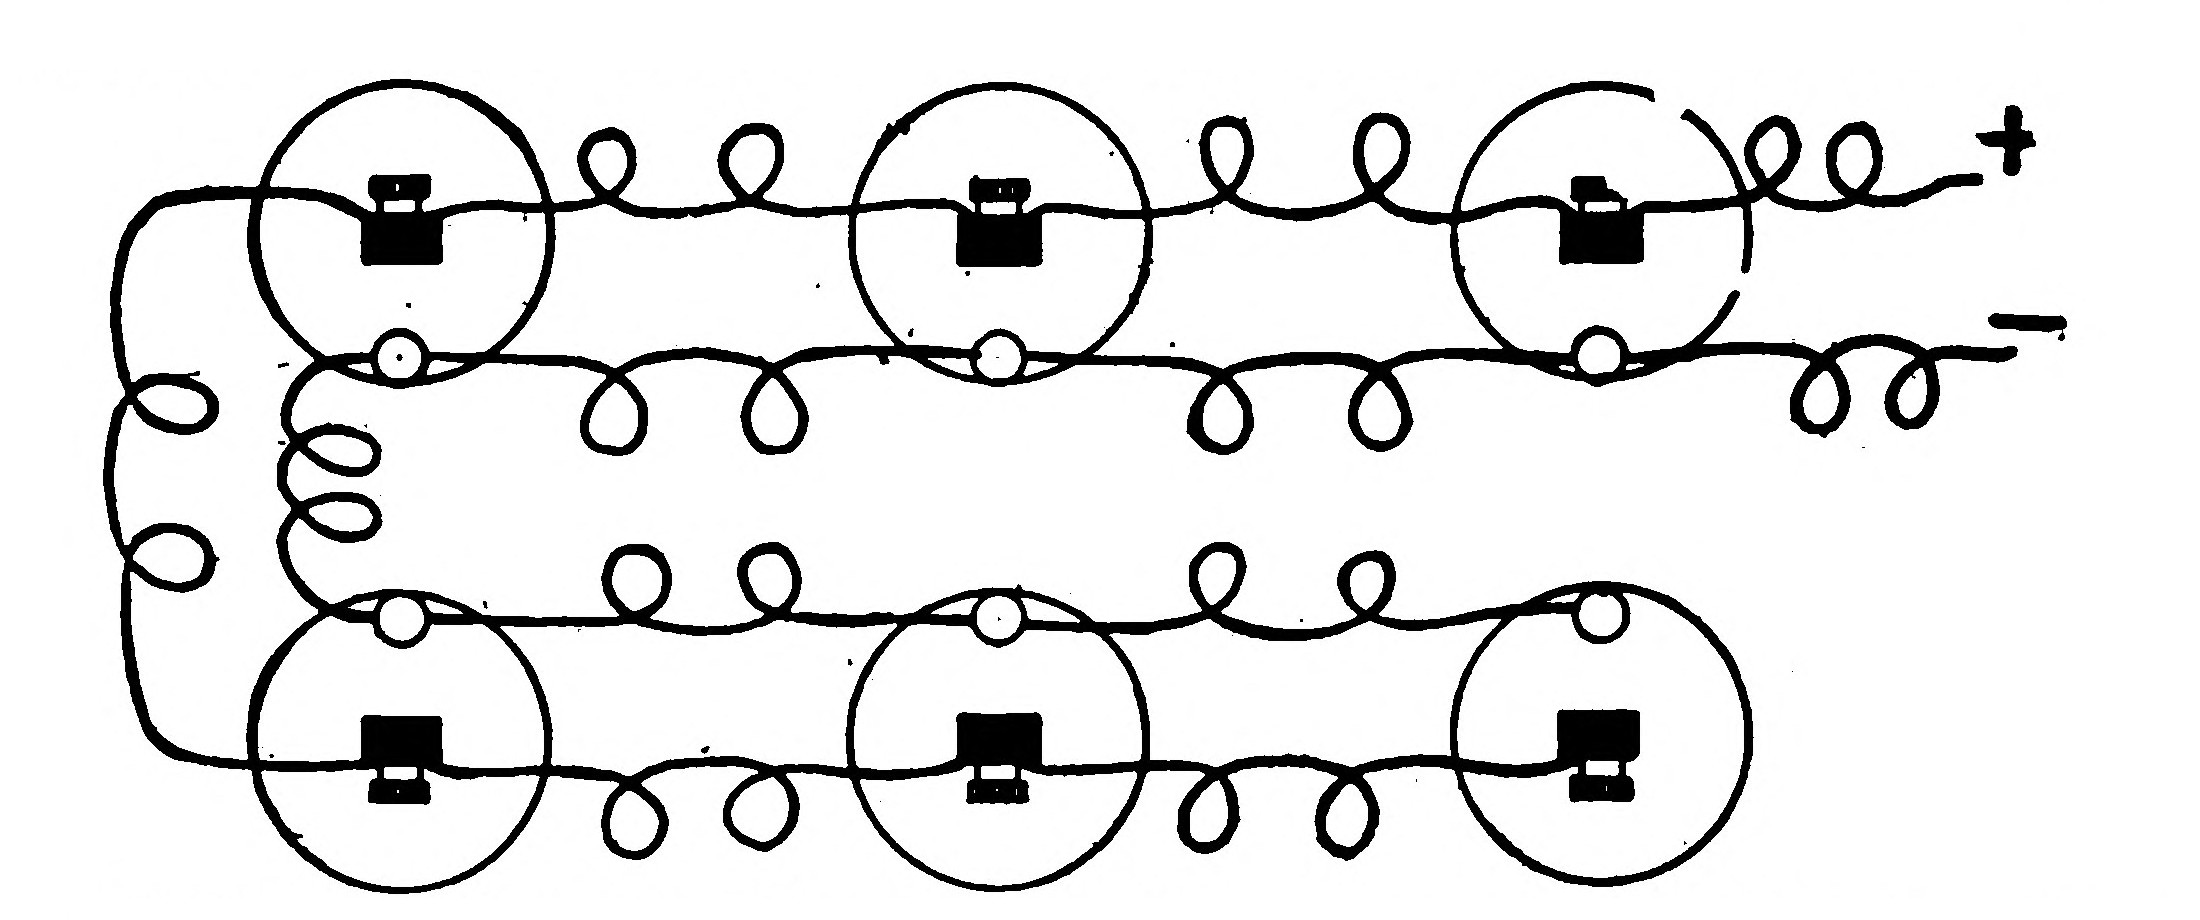 FIG. 34.—Showing Six Dry Cells connected in Multiple.